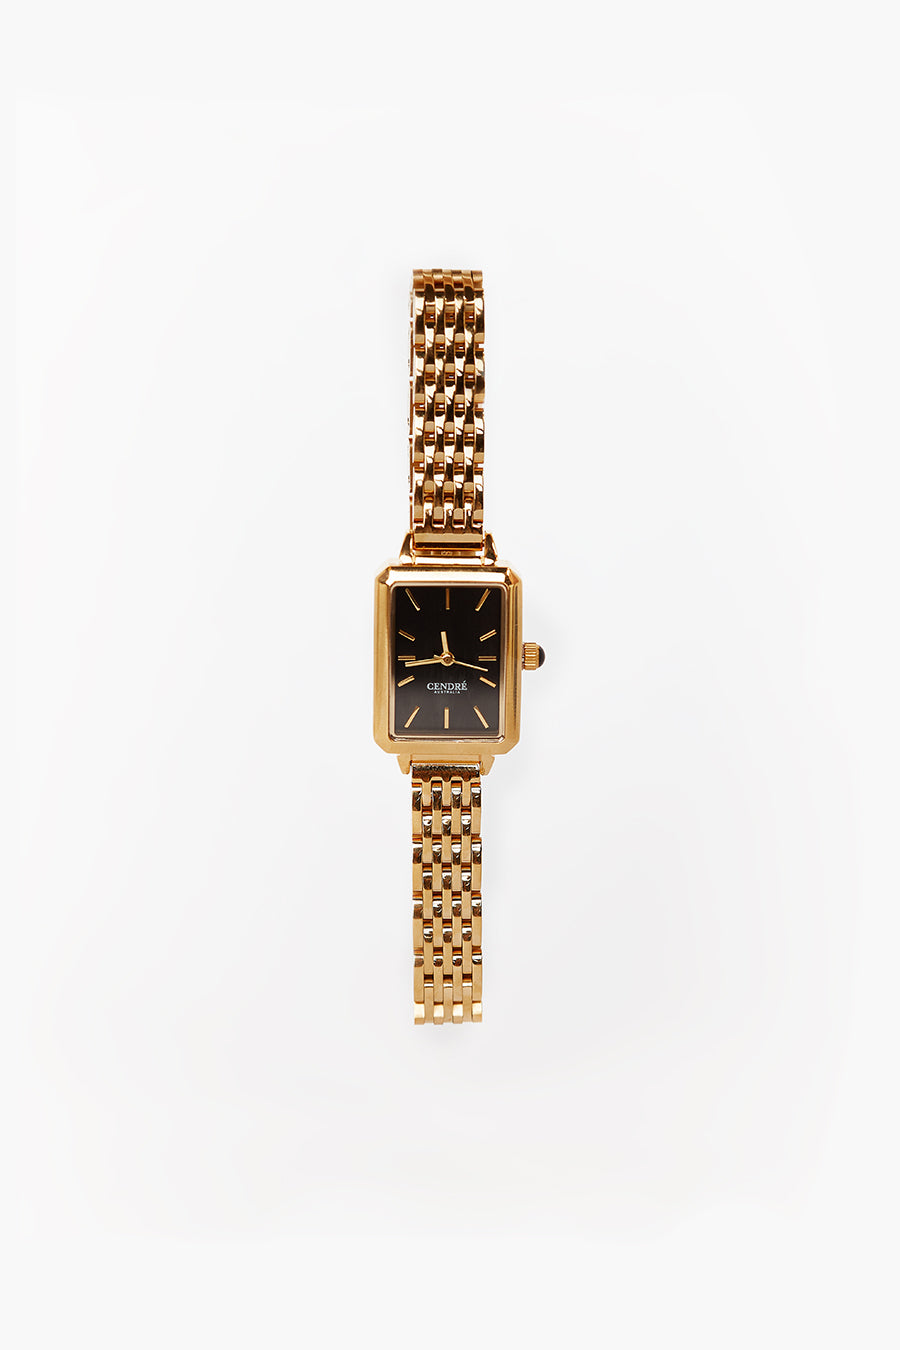 Women's ROSEFIELD Watches from $160 | Lyst